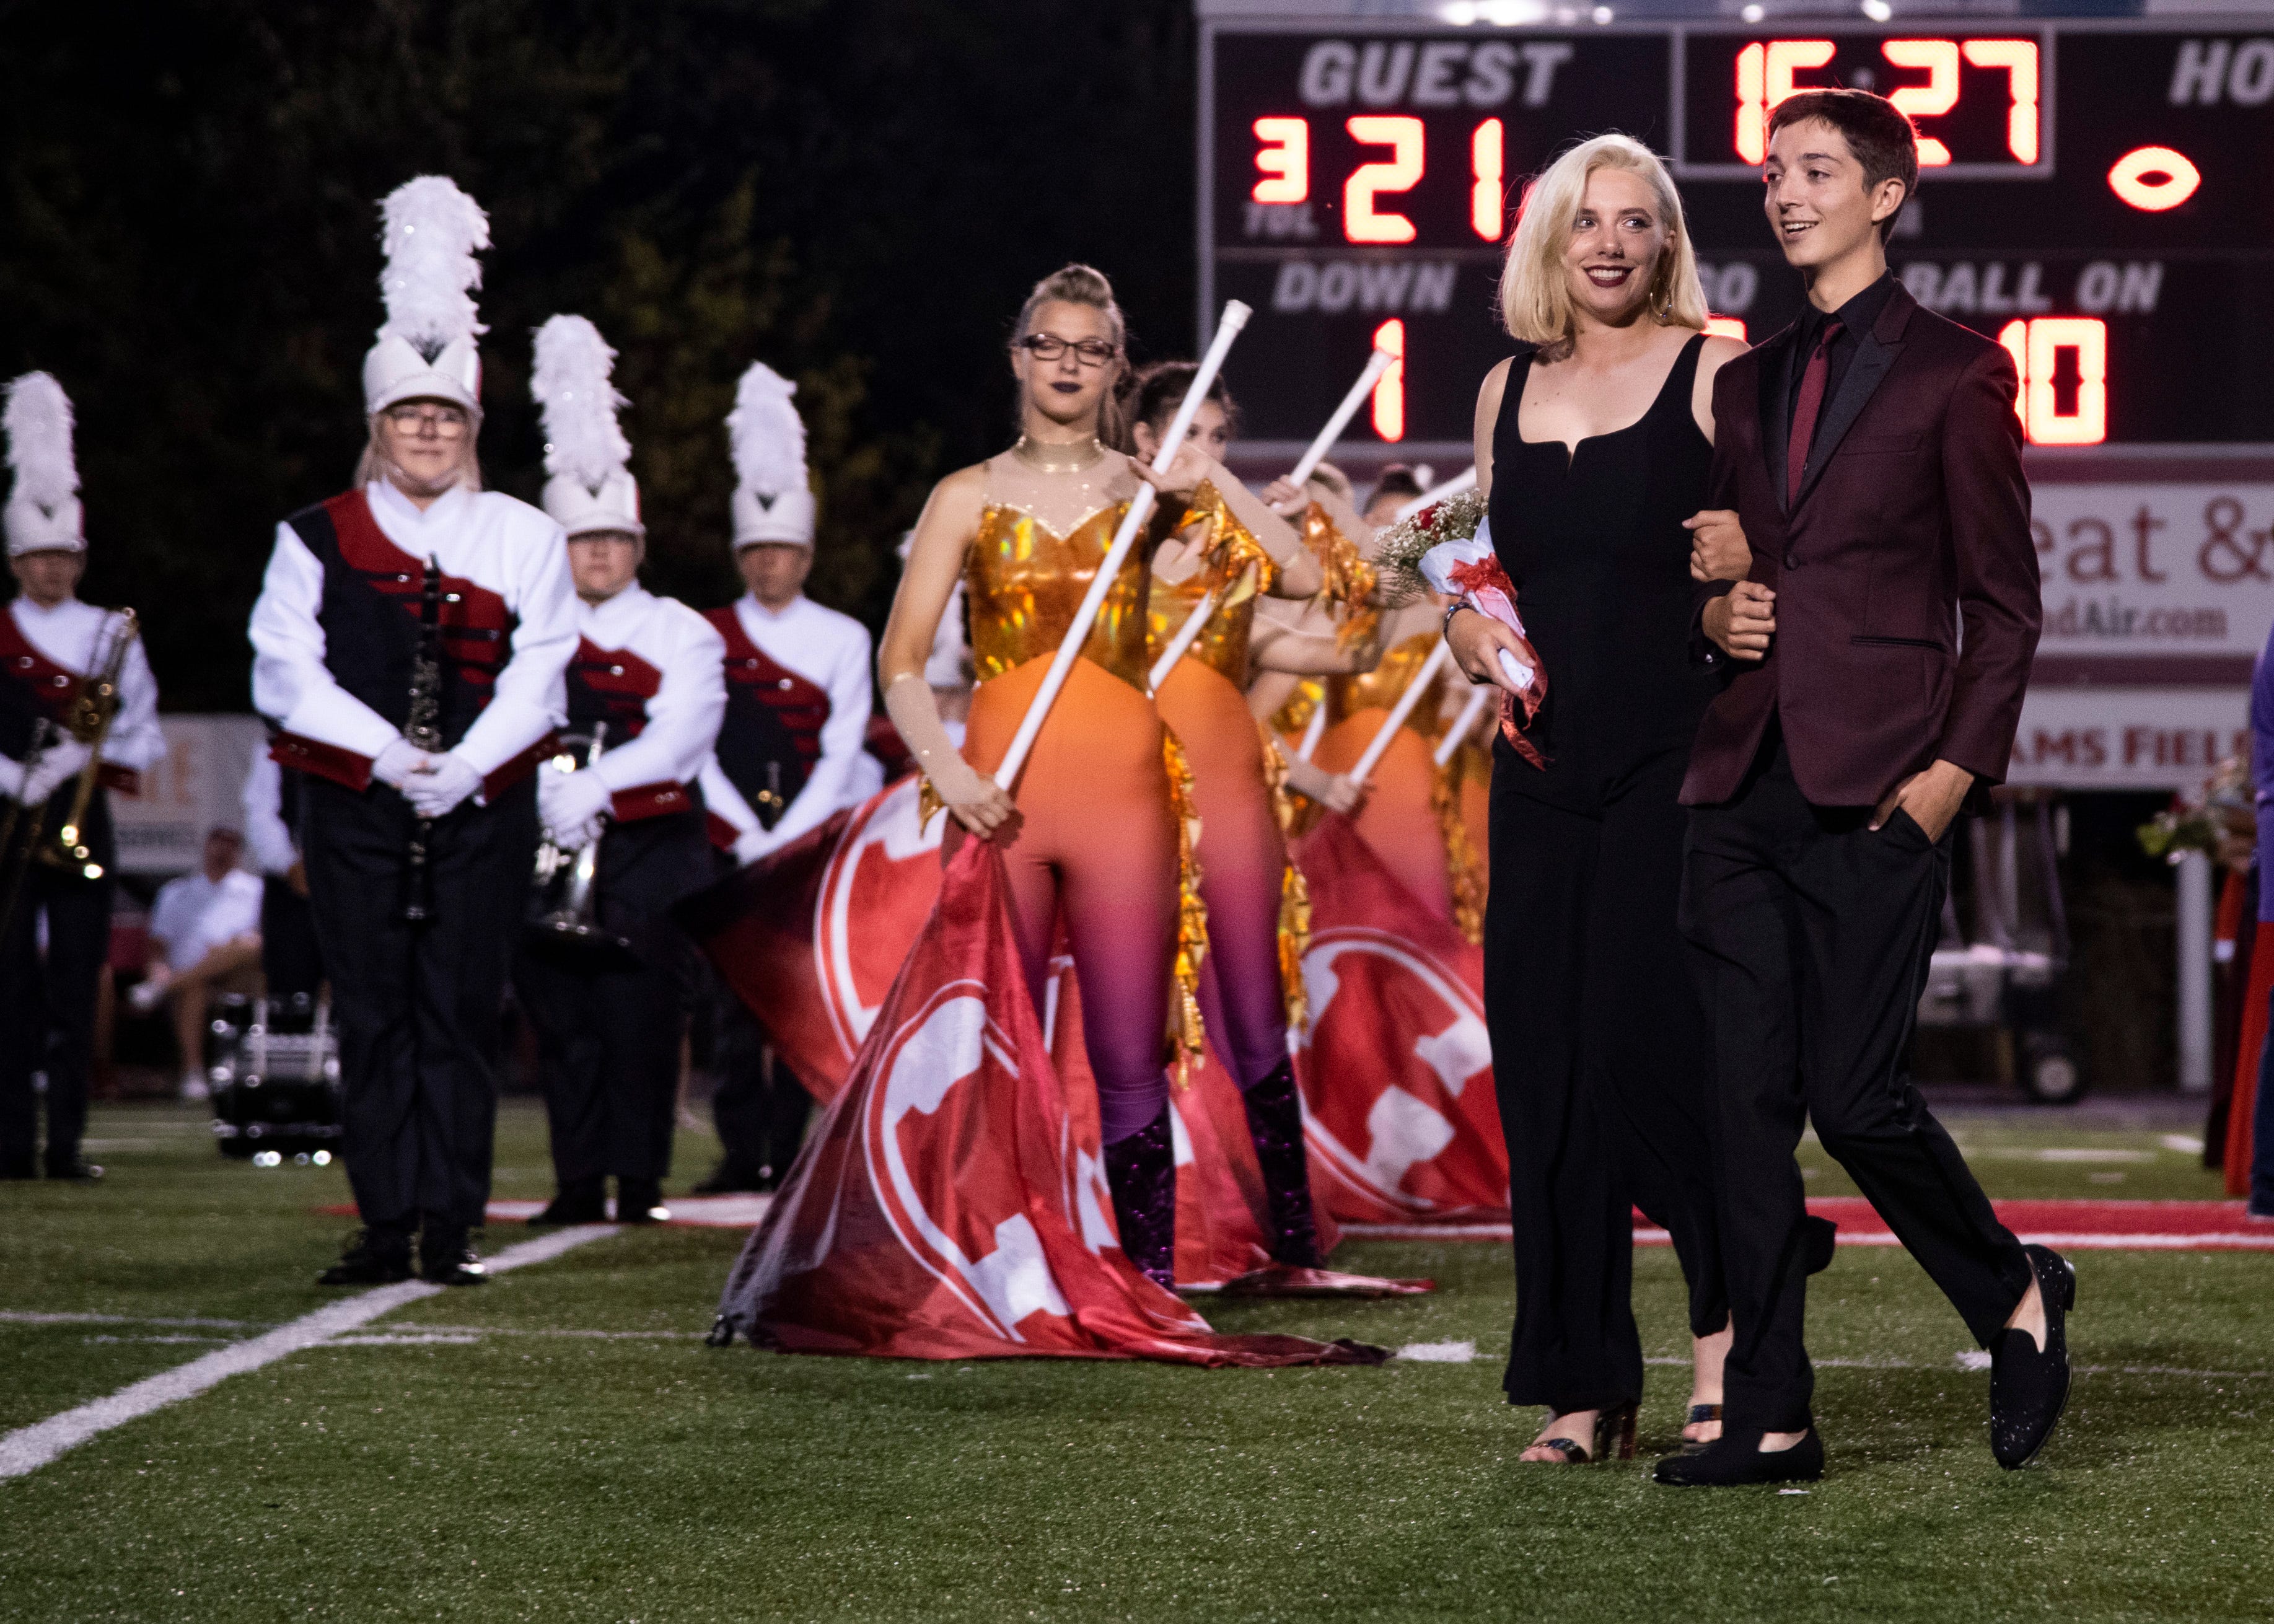 A Halls homecoming court member during the Halls and Central high school football game Friday, Oct. 4, 2019, at Halls High School.